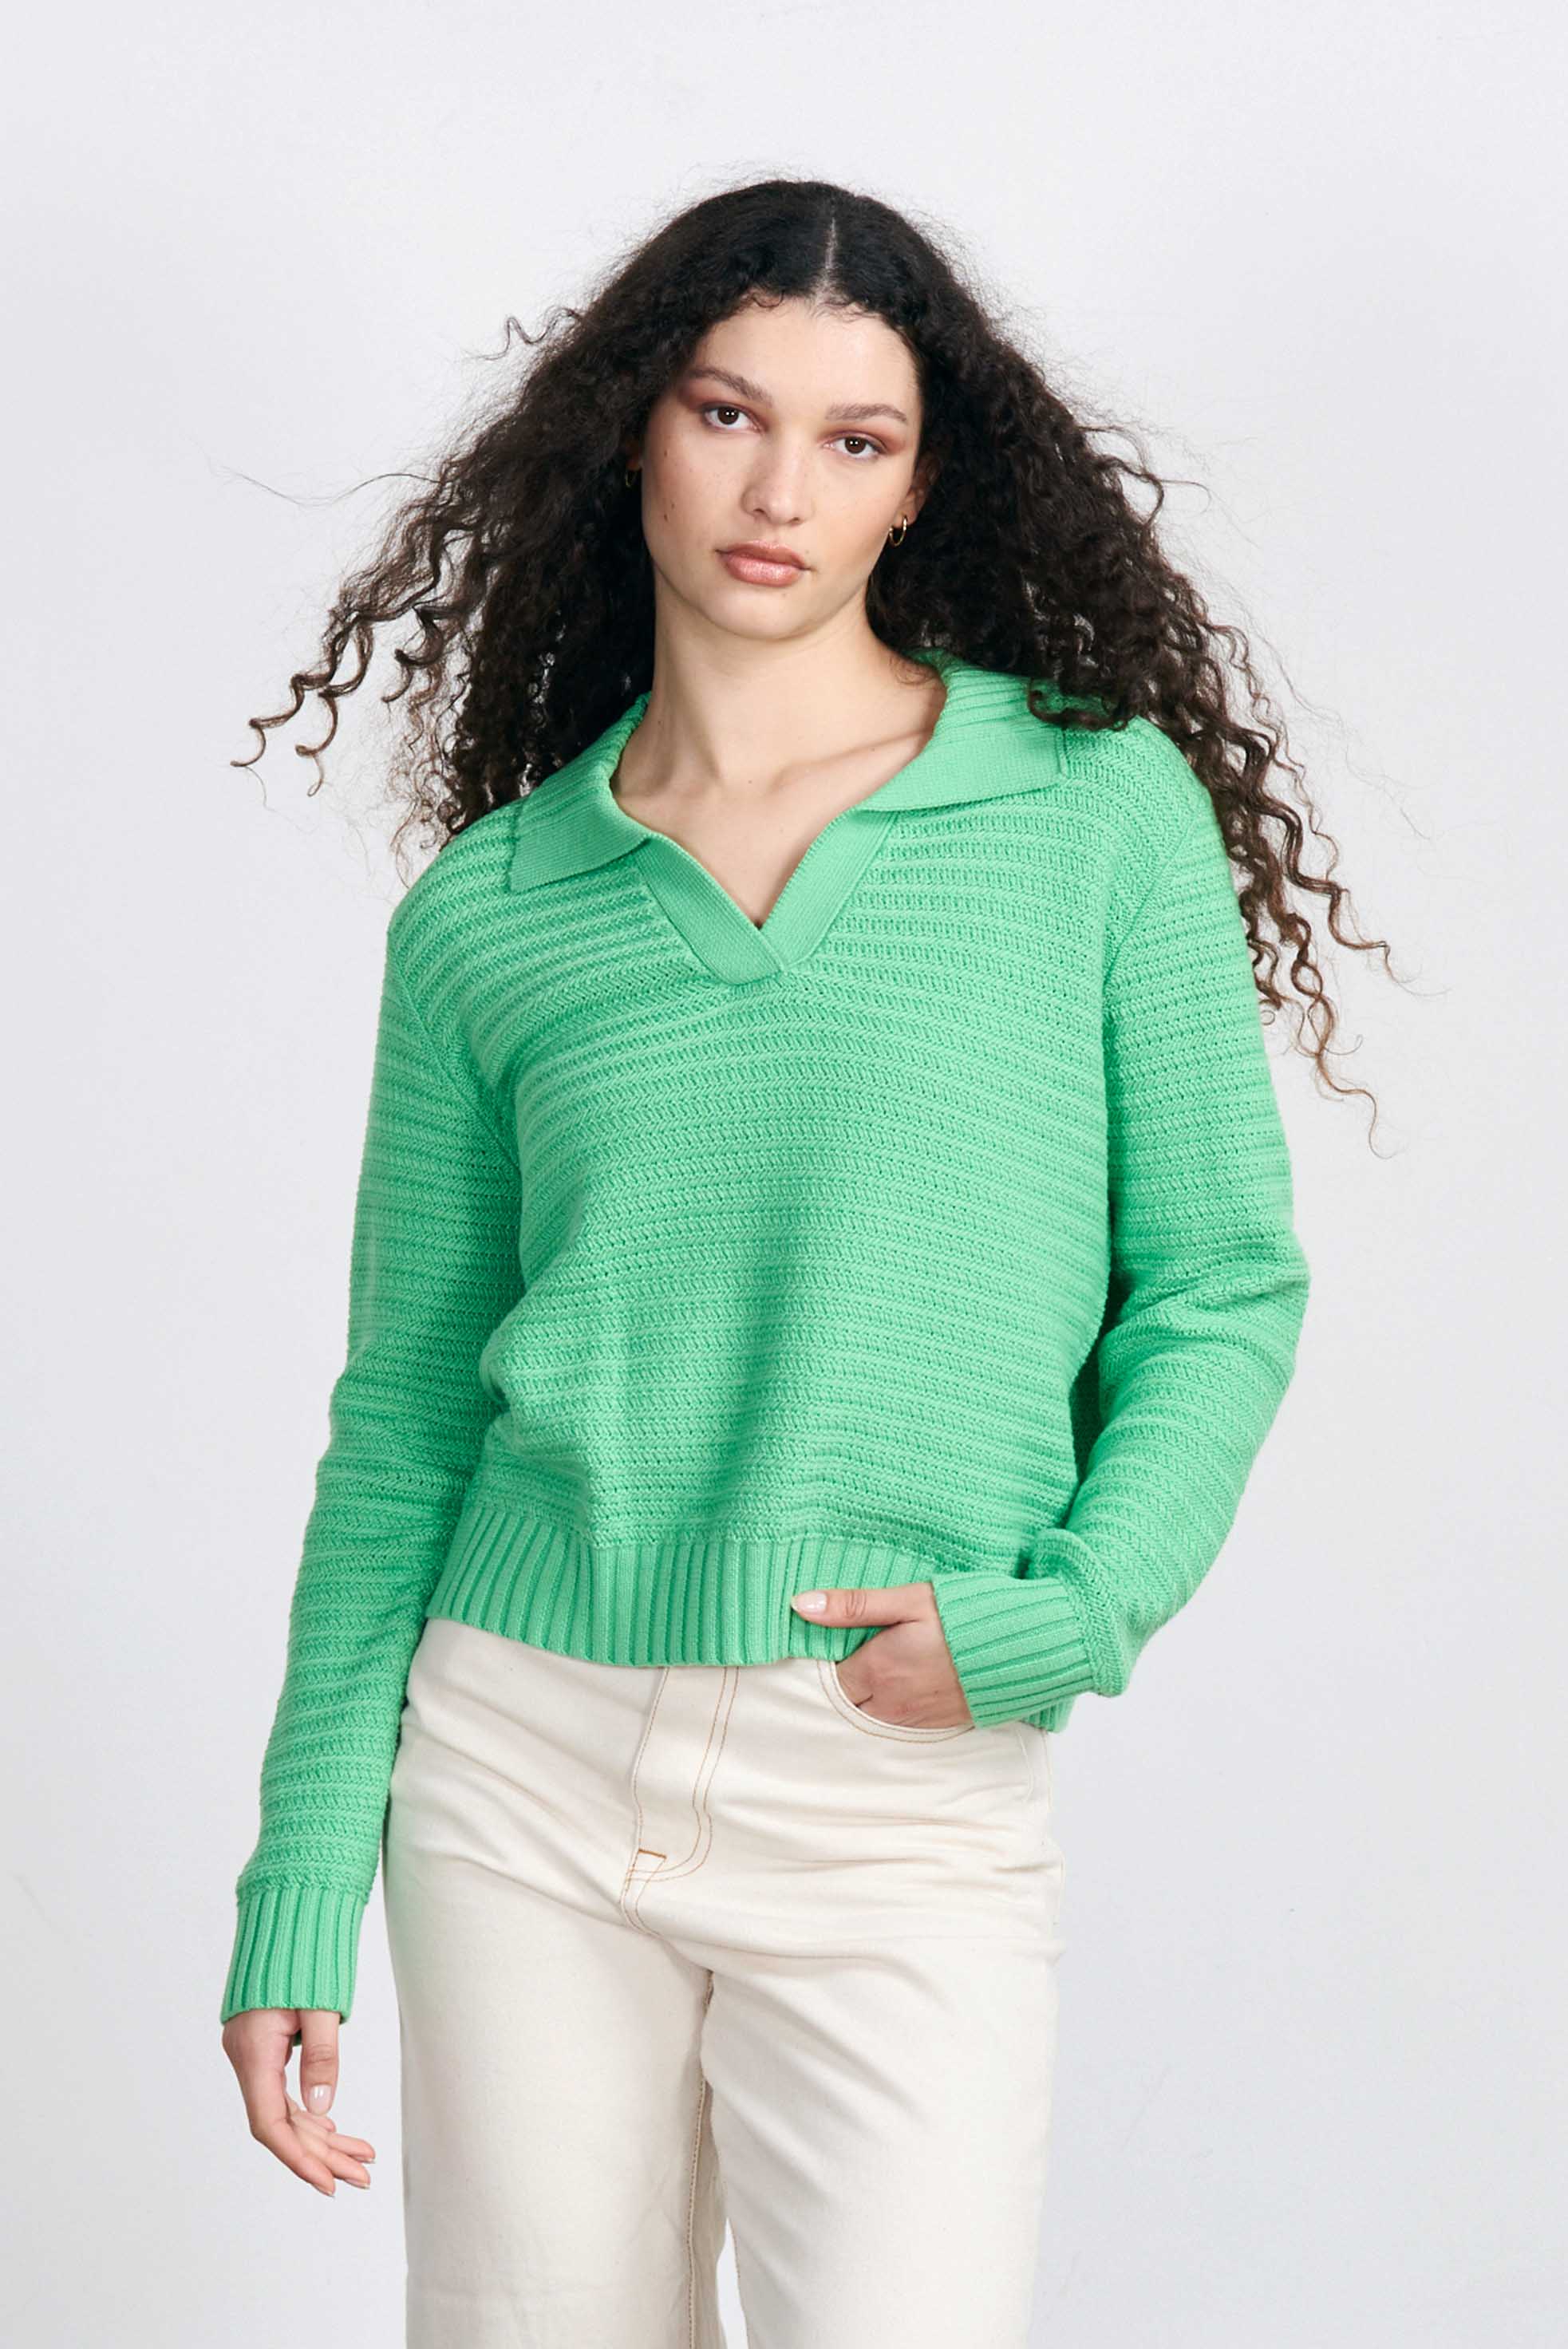 Brown haired female model wearing Jumper1234 Apple green cotton jumper with a collar in a fabulous all over herringbone stitch